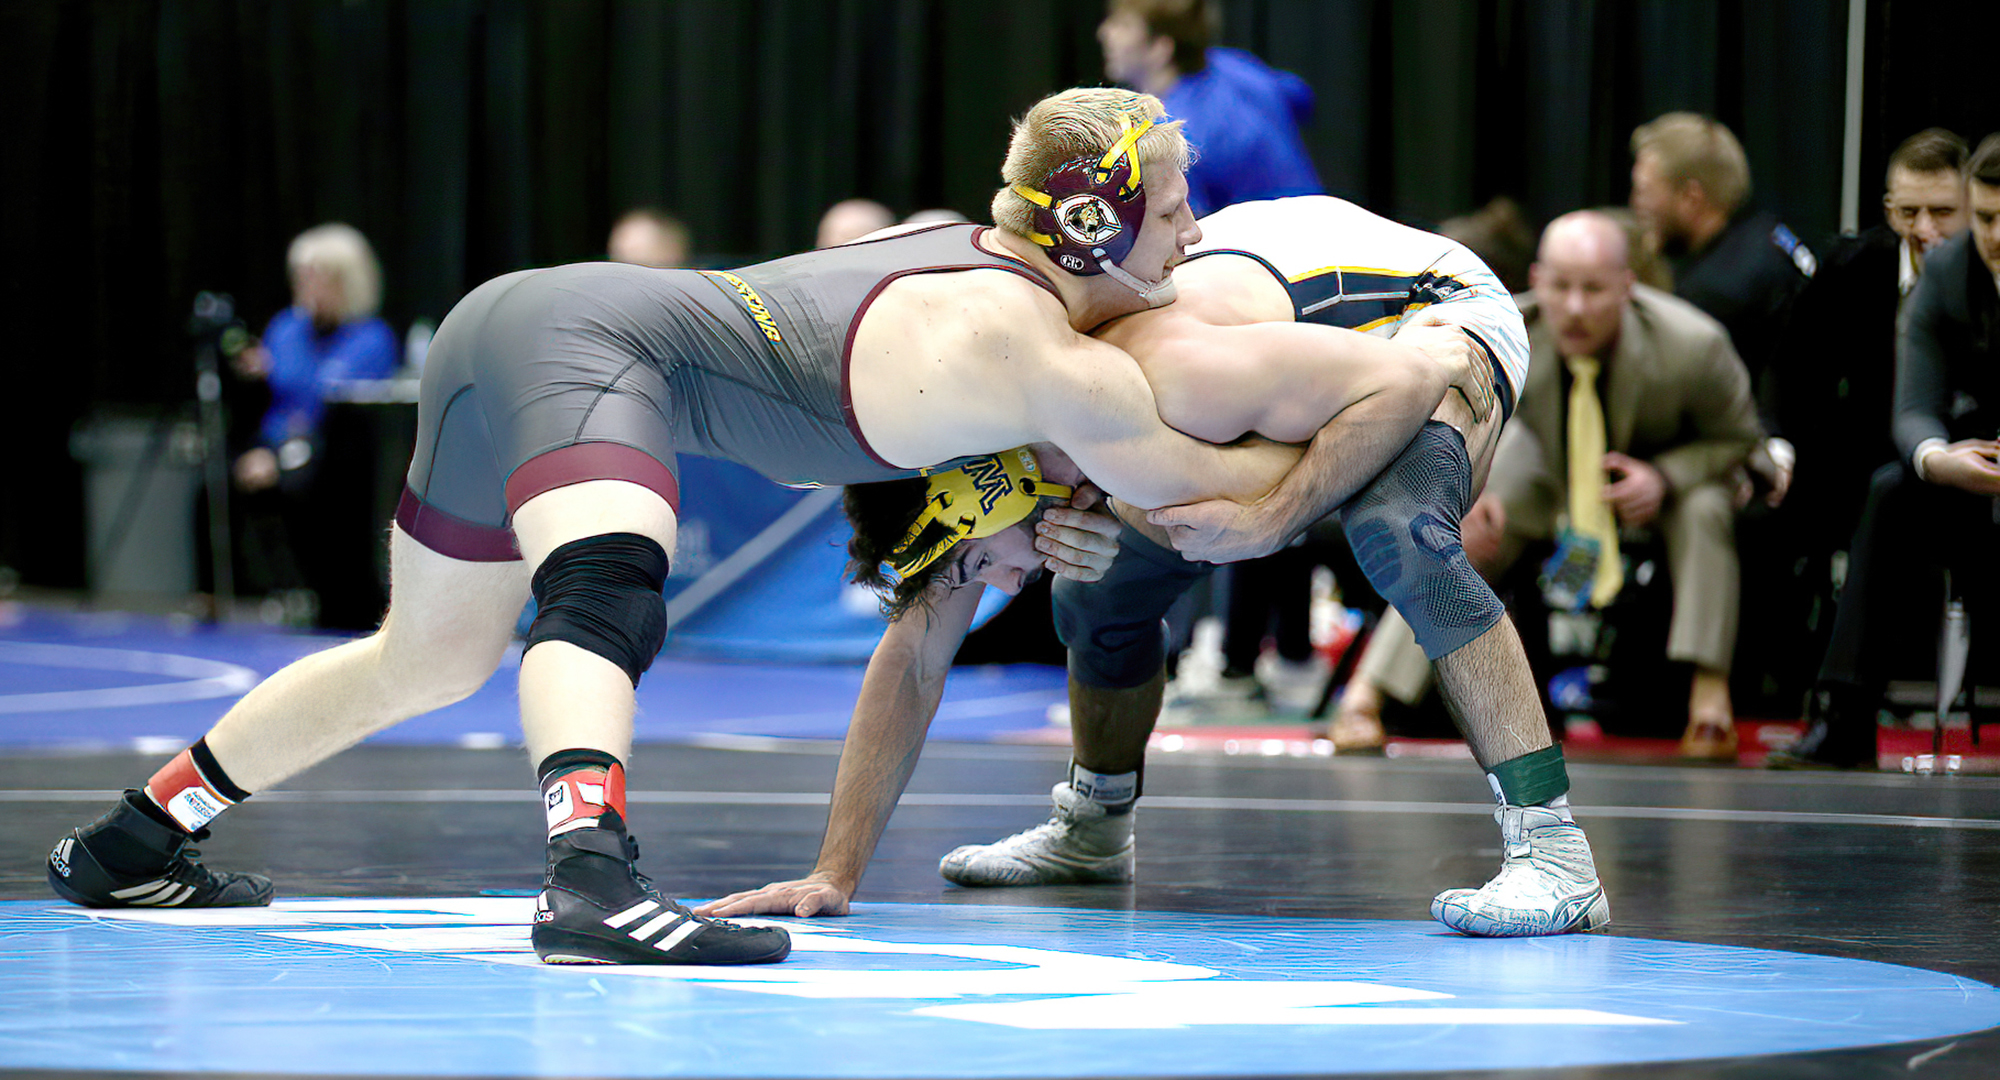 Senior Gabe Zierden joined elite company over the weekend with his runner-up finish at the NCAA Division III wrestling tournament.